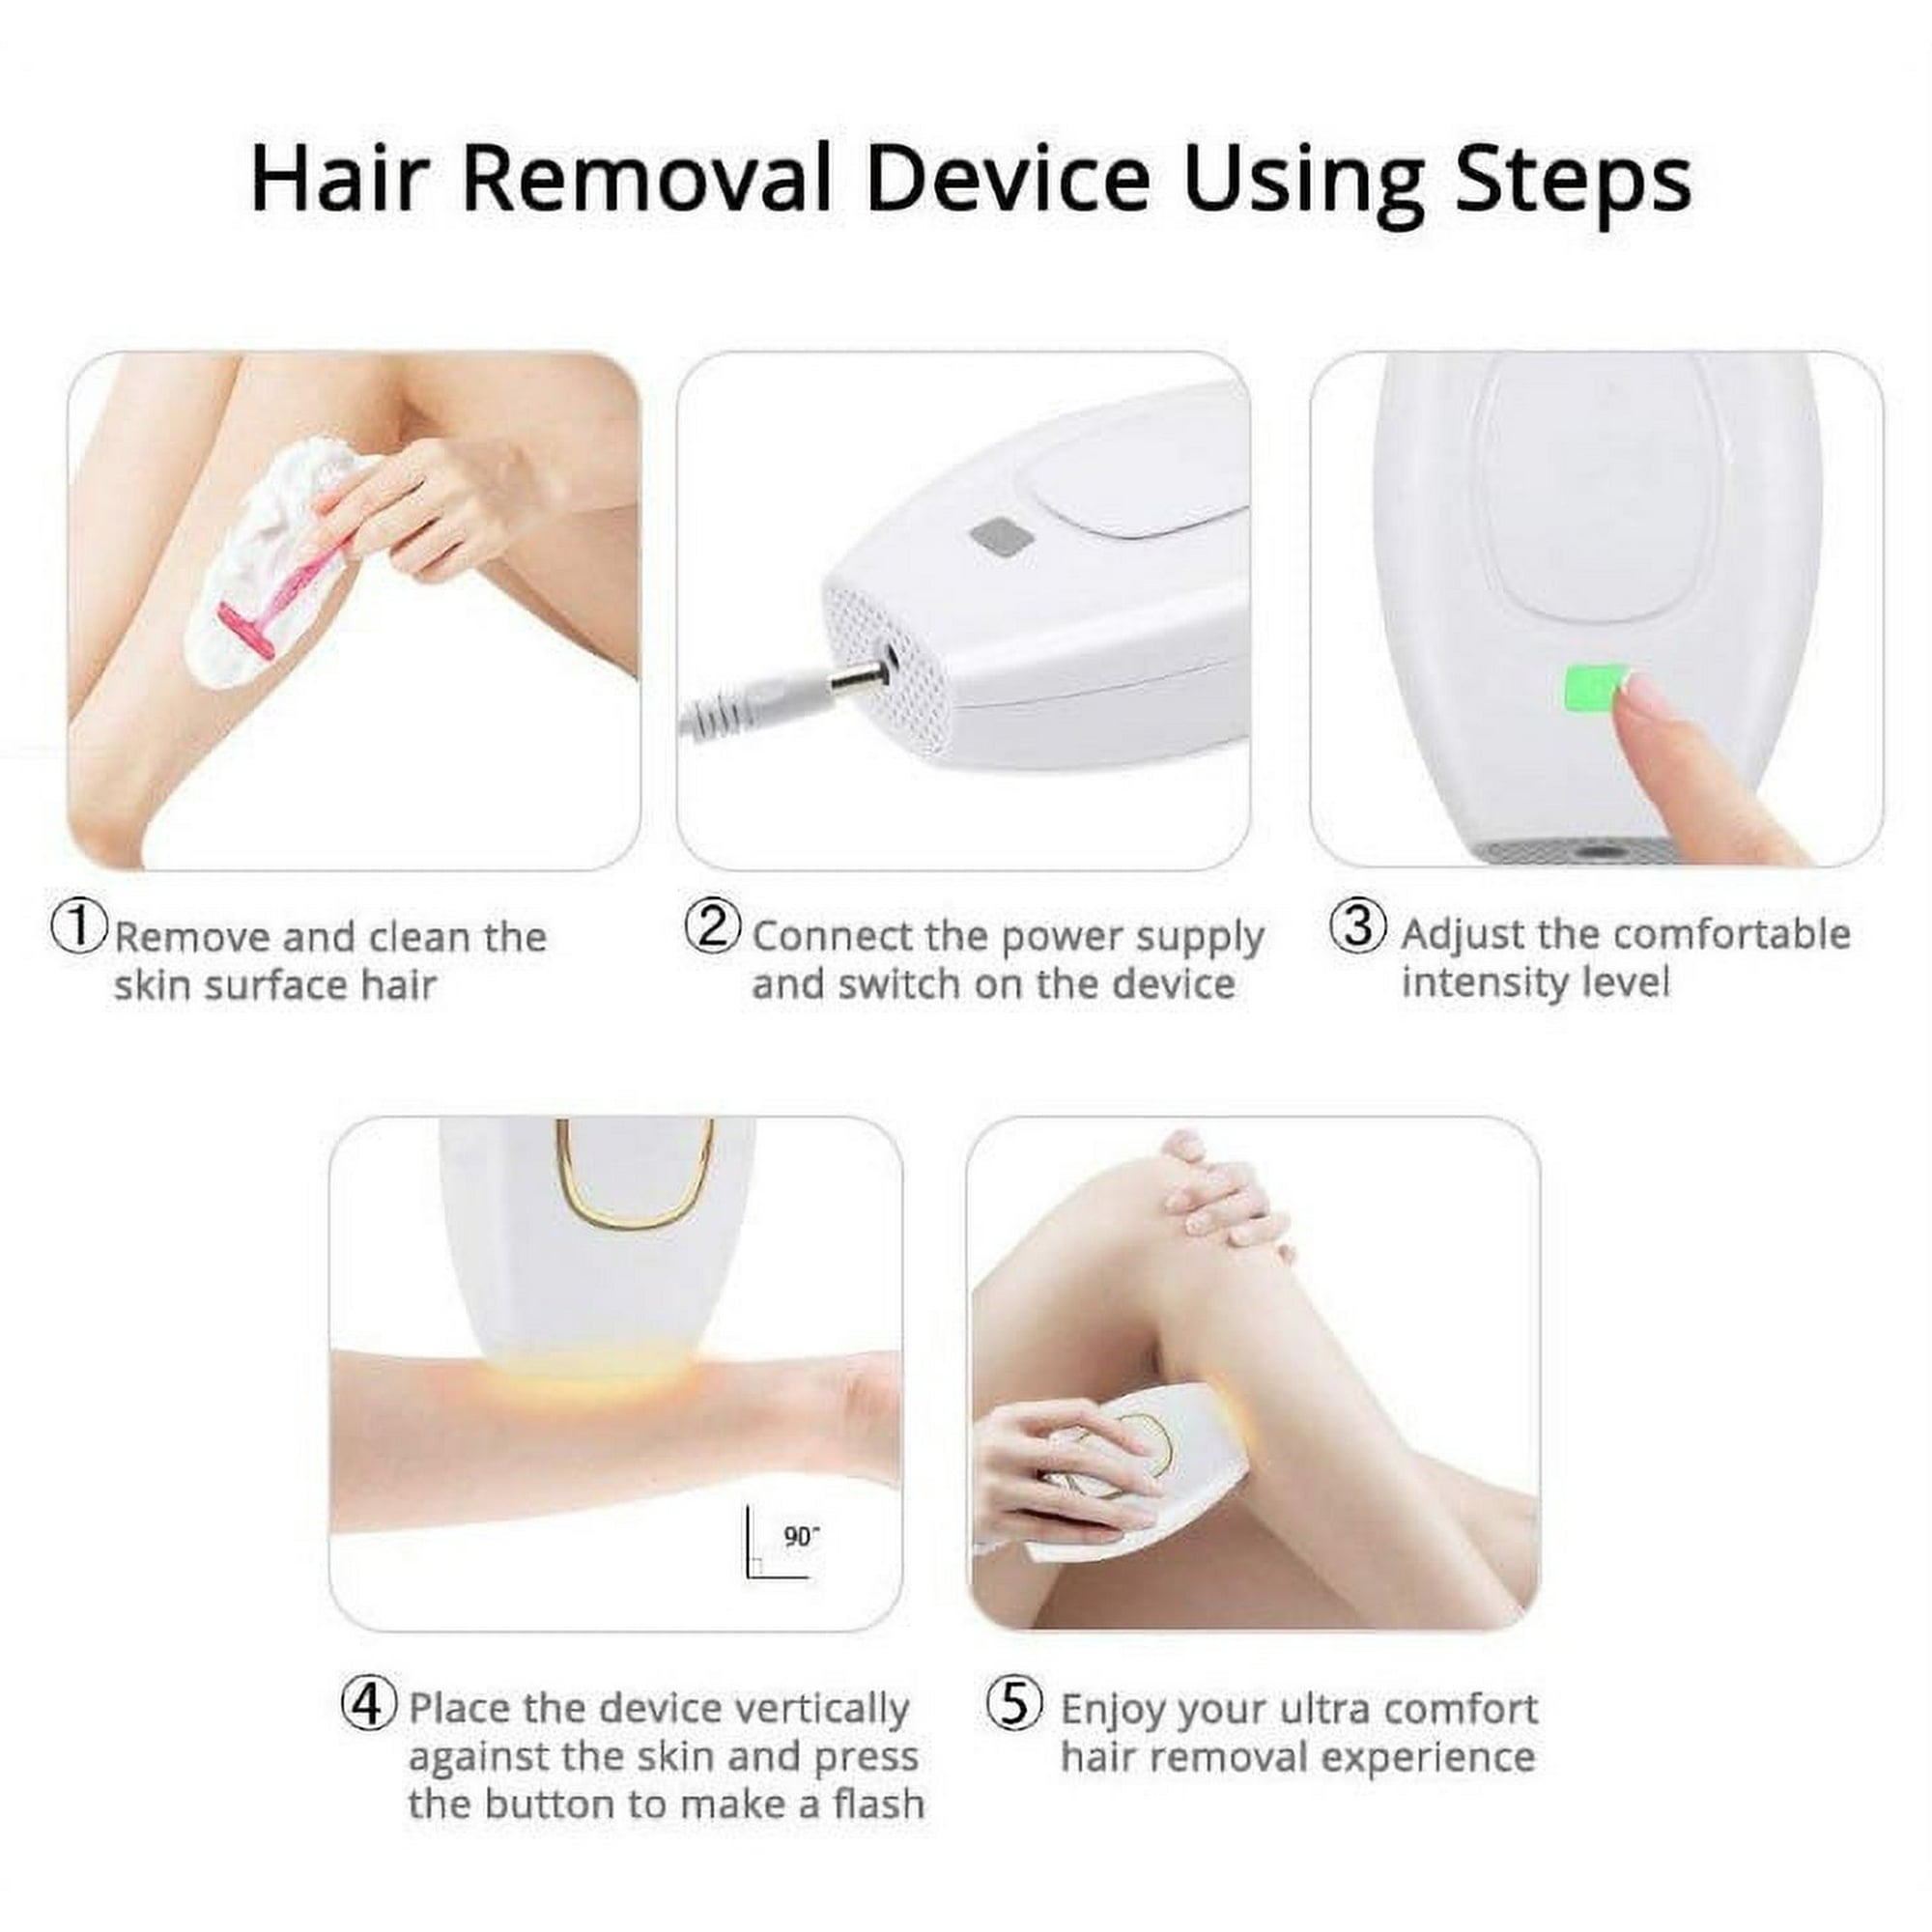 IPL - Laser Hair Removal at Home